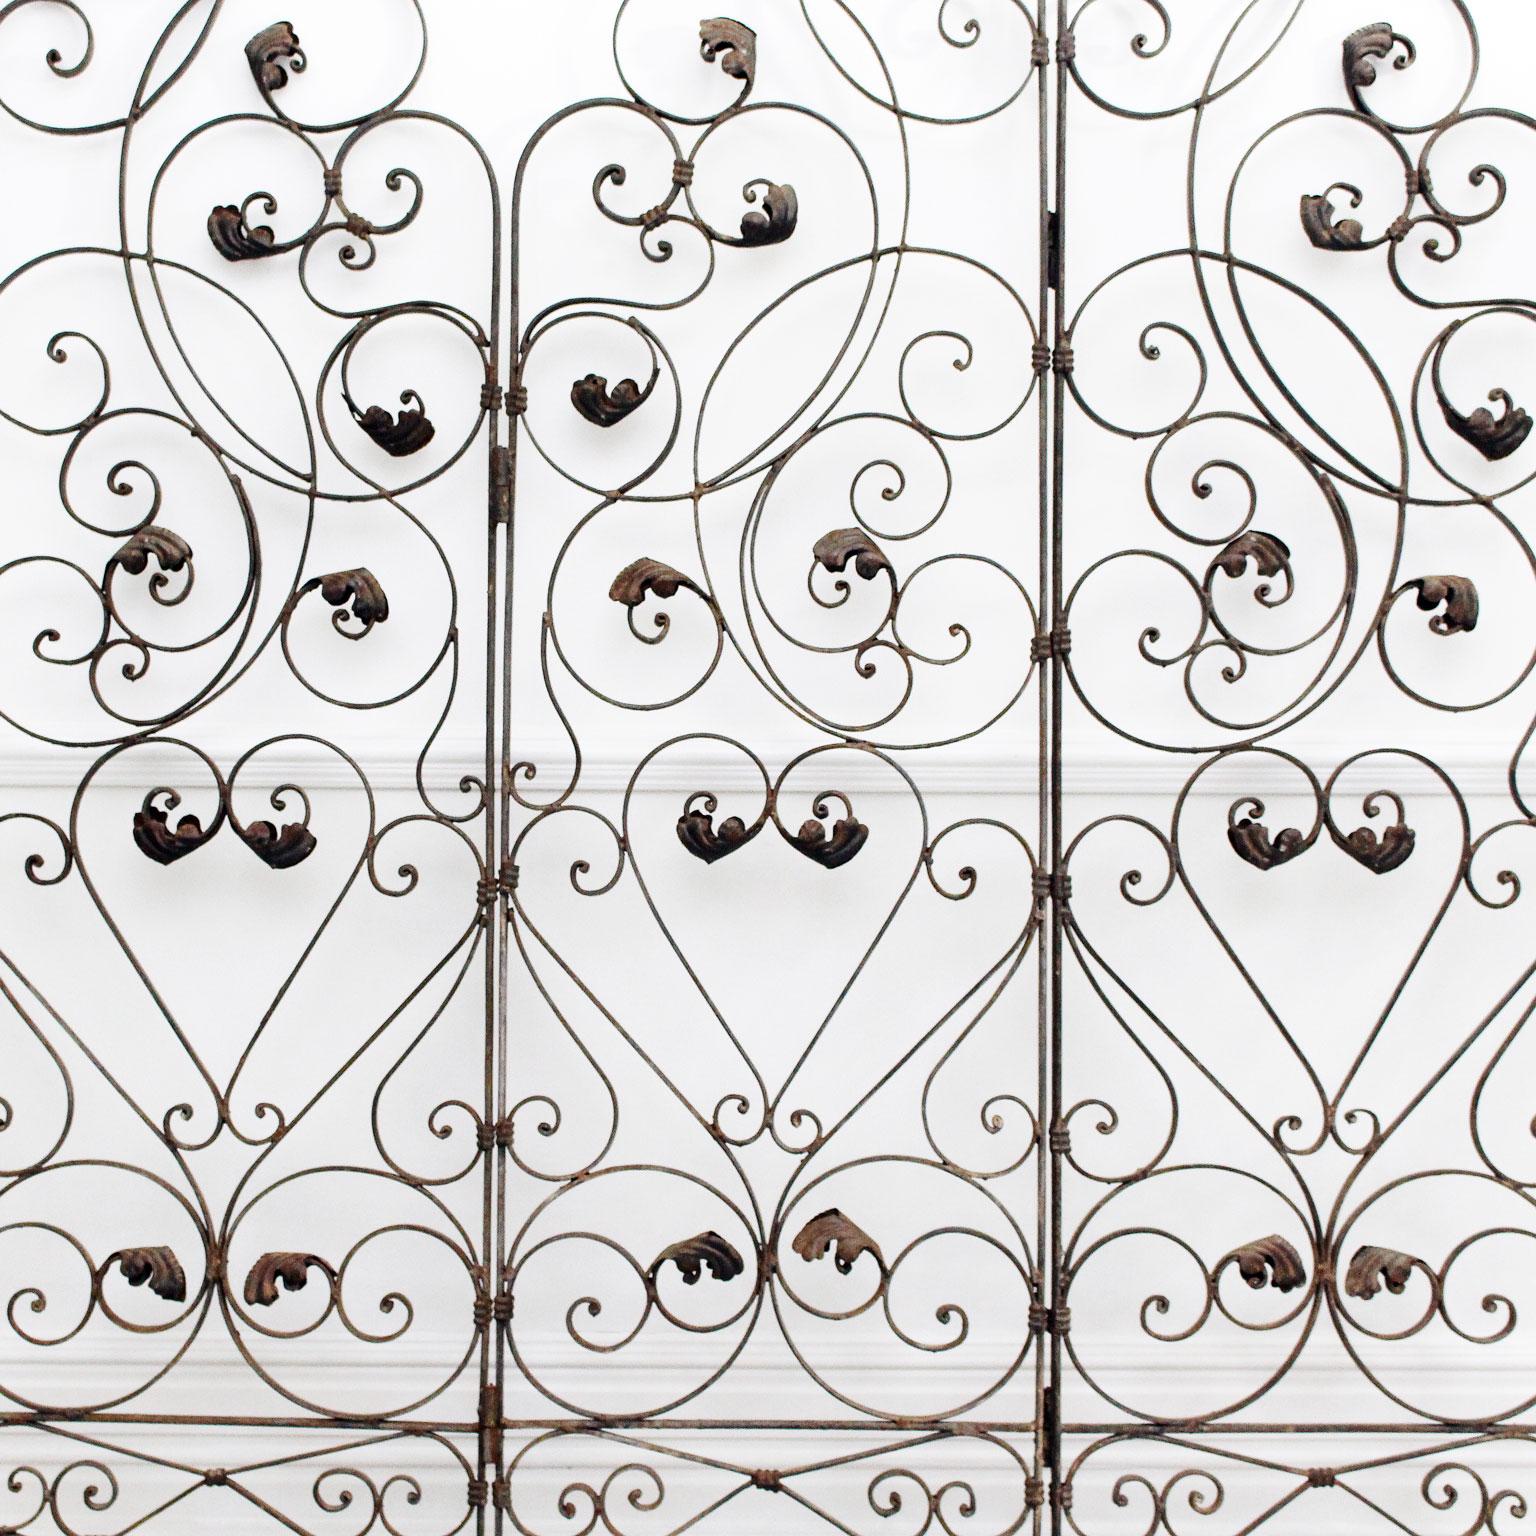 This tremendously ornate metal room divider or garden screen is decorated throughout with swirls and leaves. There are three sides, which can be arranged either to stand freely or which would also look great flat against the wall behind a table or